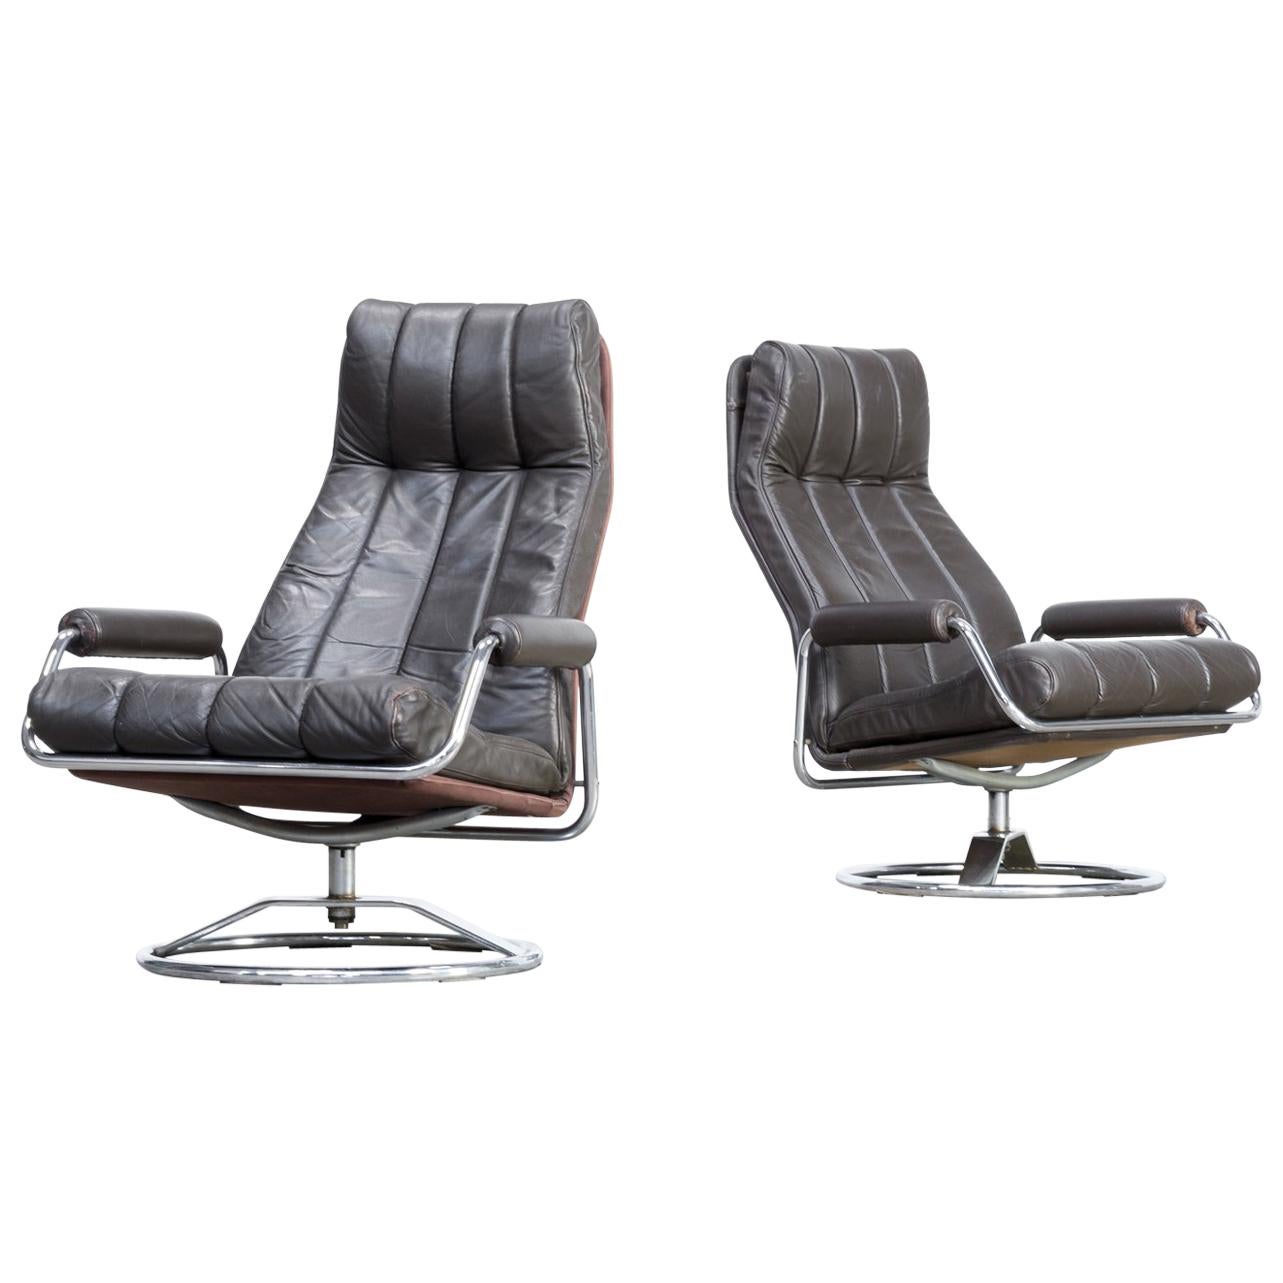 1970s Leather Lounge Fauteuil Swivel Chair Set of 2 For Sale